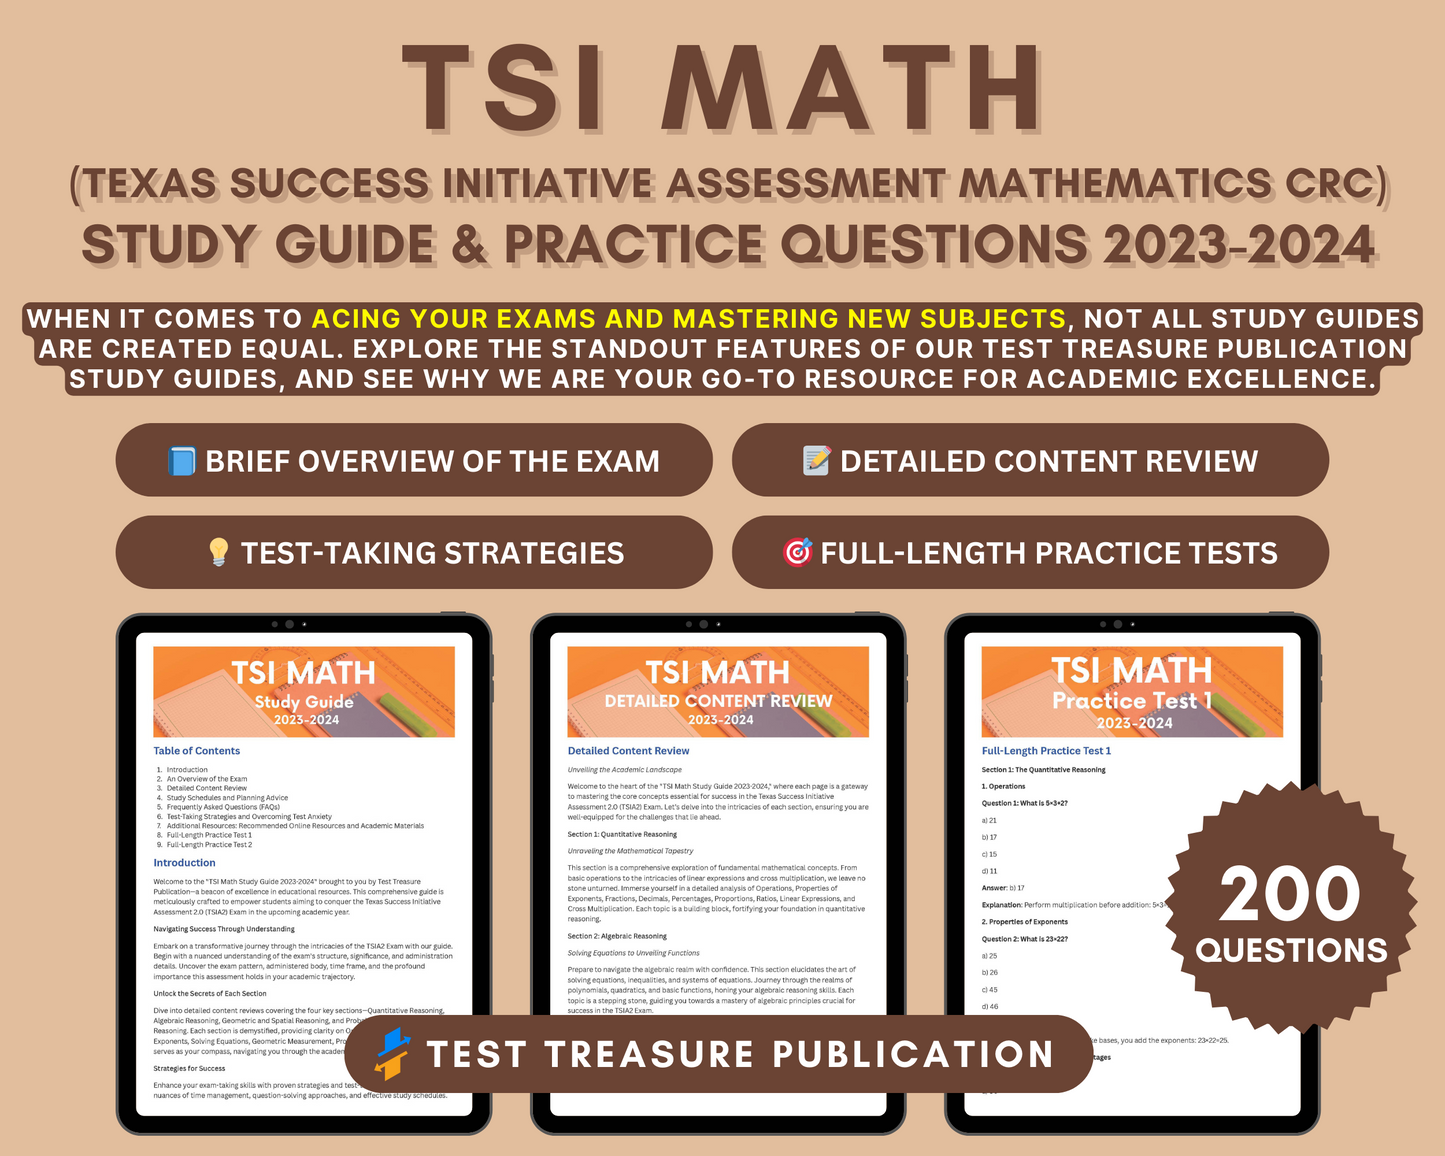 TSI Math Study Guide 2023-2024: In-Depth Content Review & Practice Tests for Texas Success Initiative Assessment Test